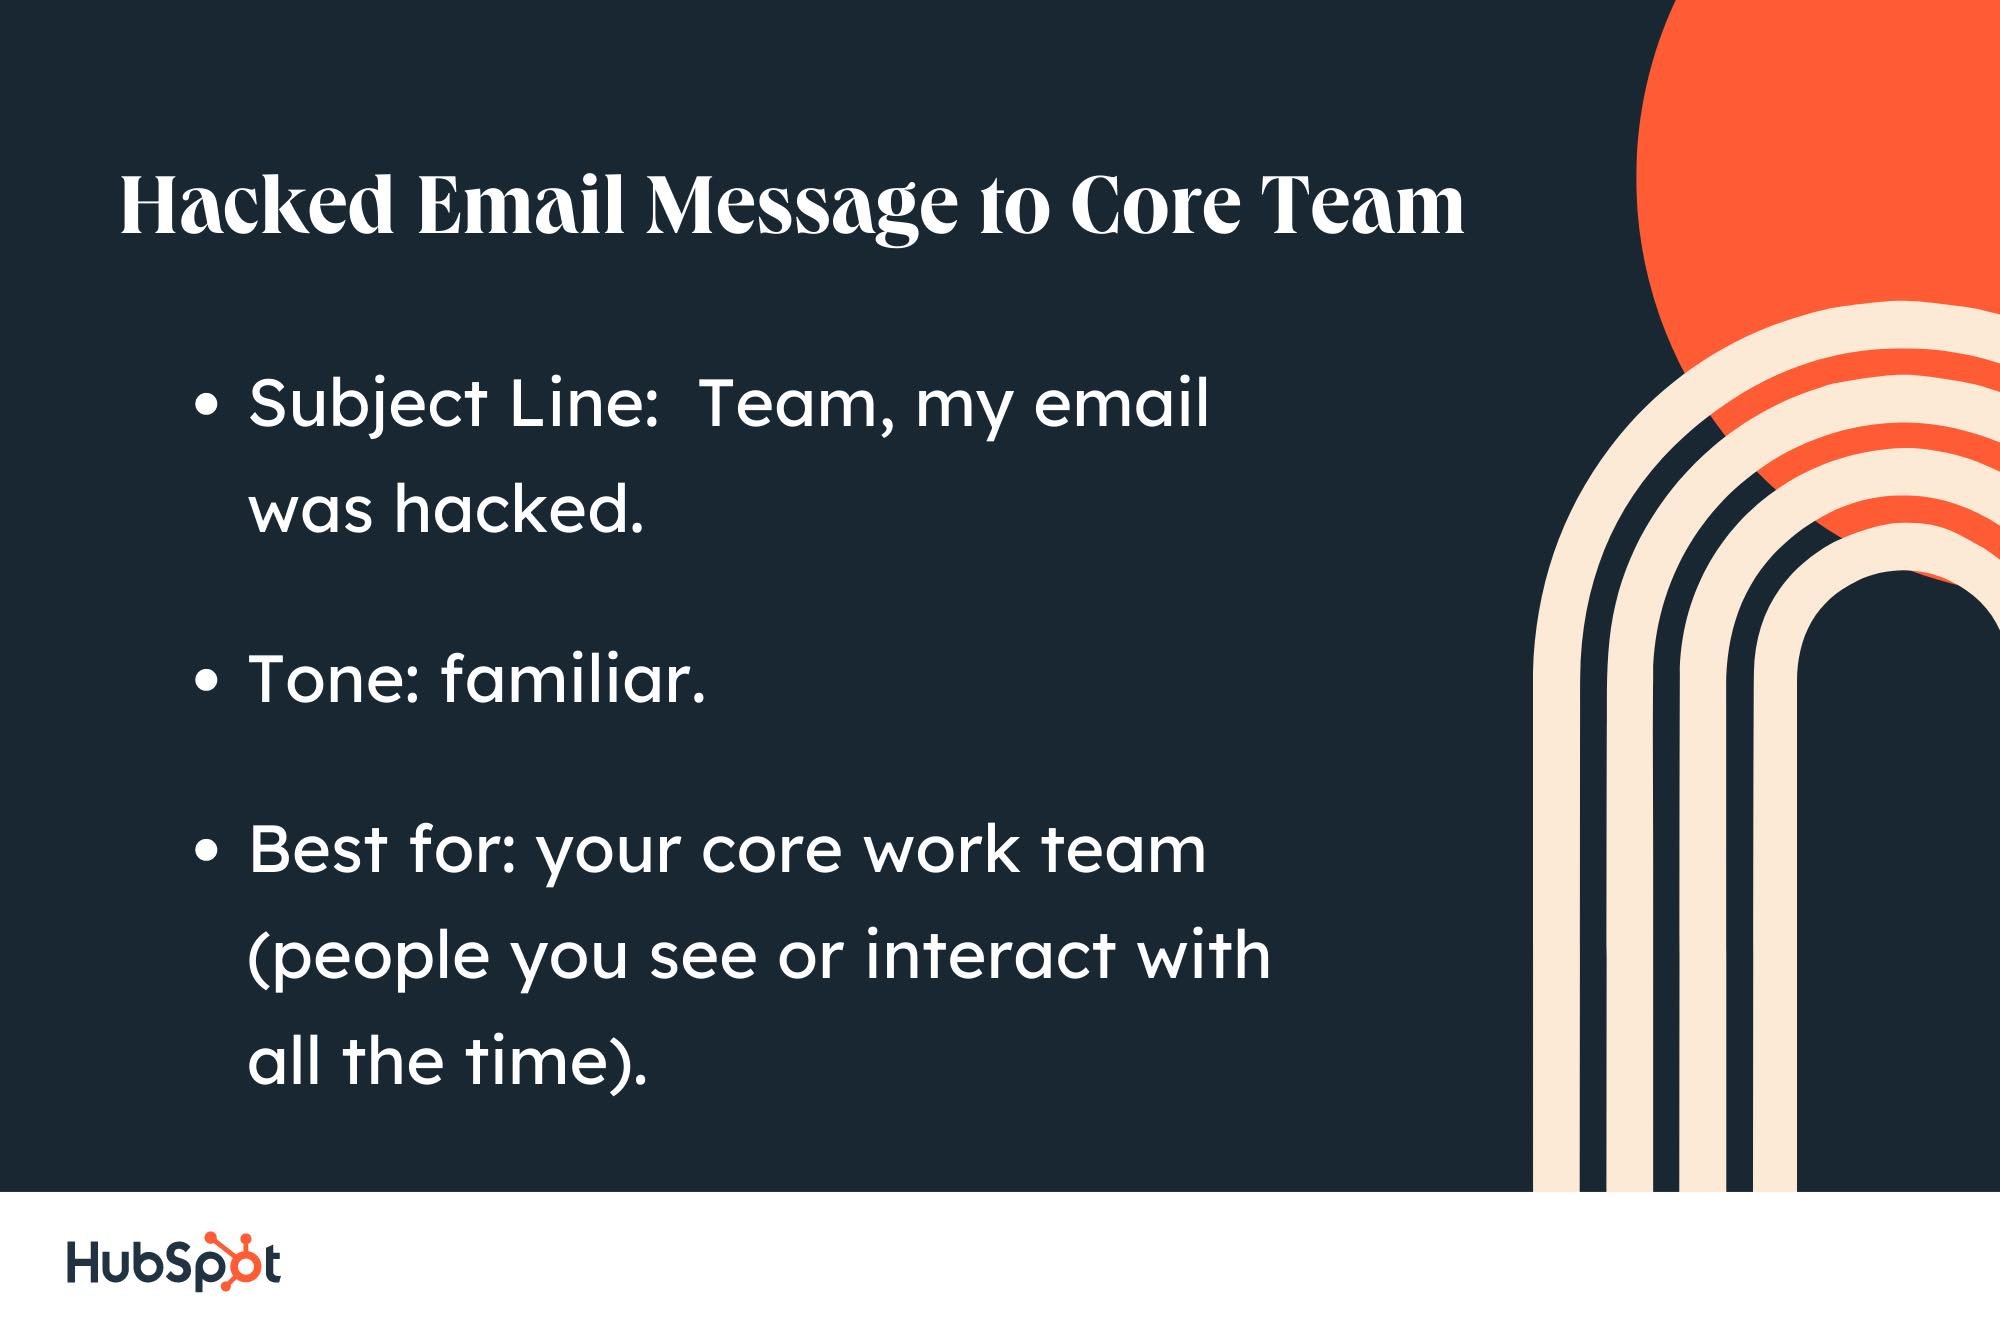 sample letter for hacked email: subject line, Team, my email was hacked; tone, familiar; best for your core work team.